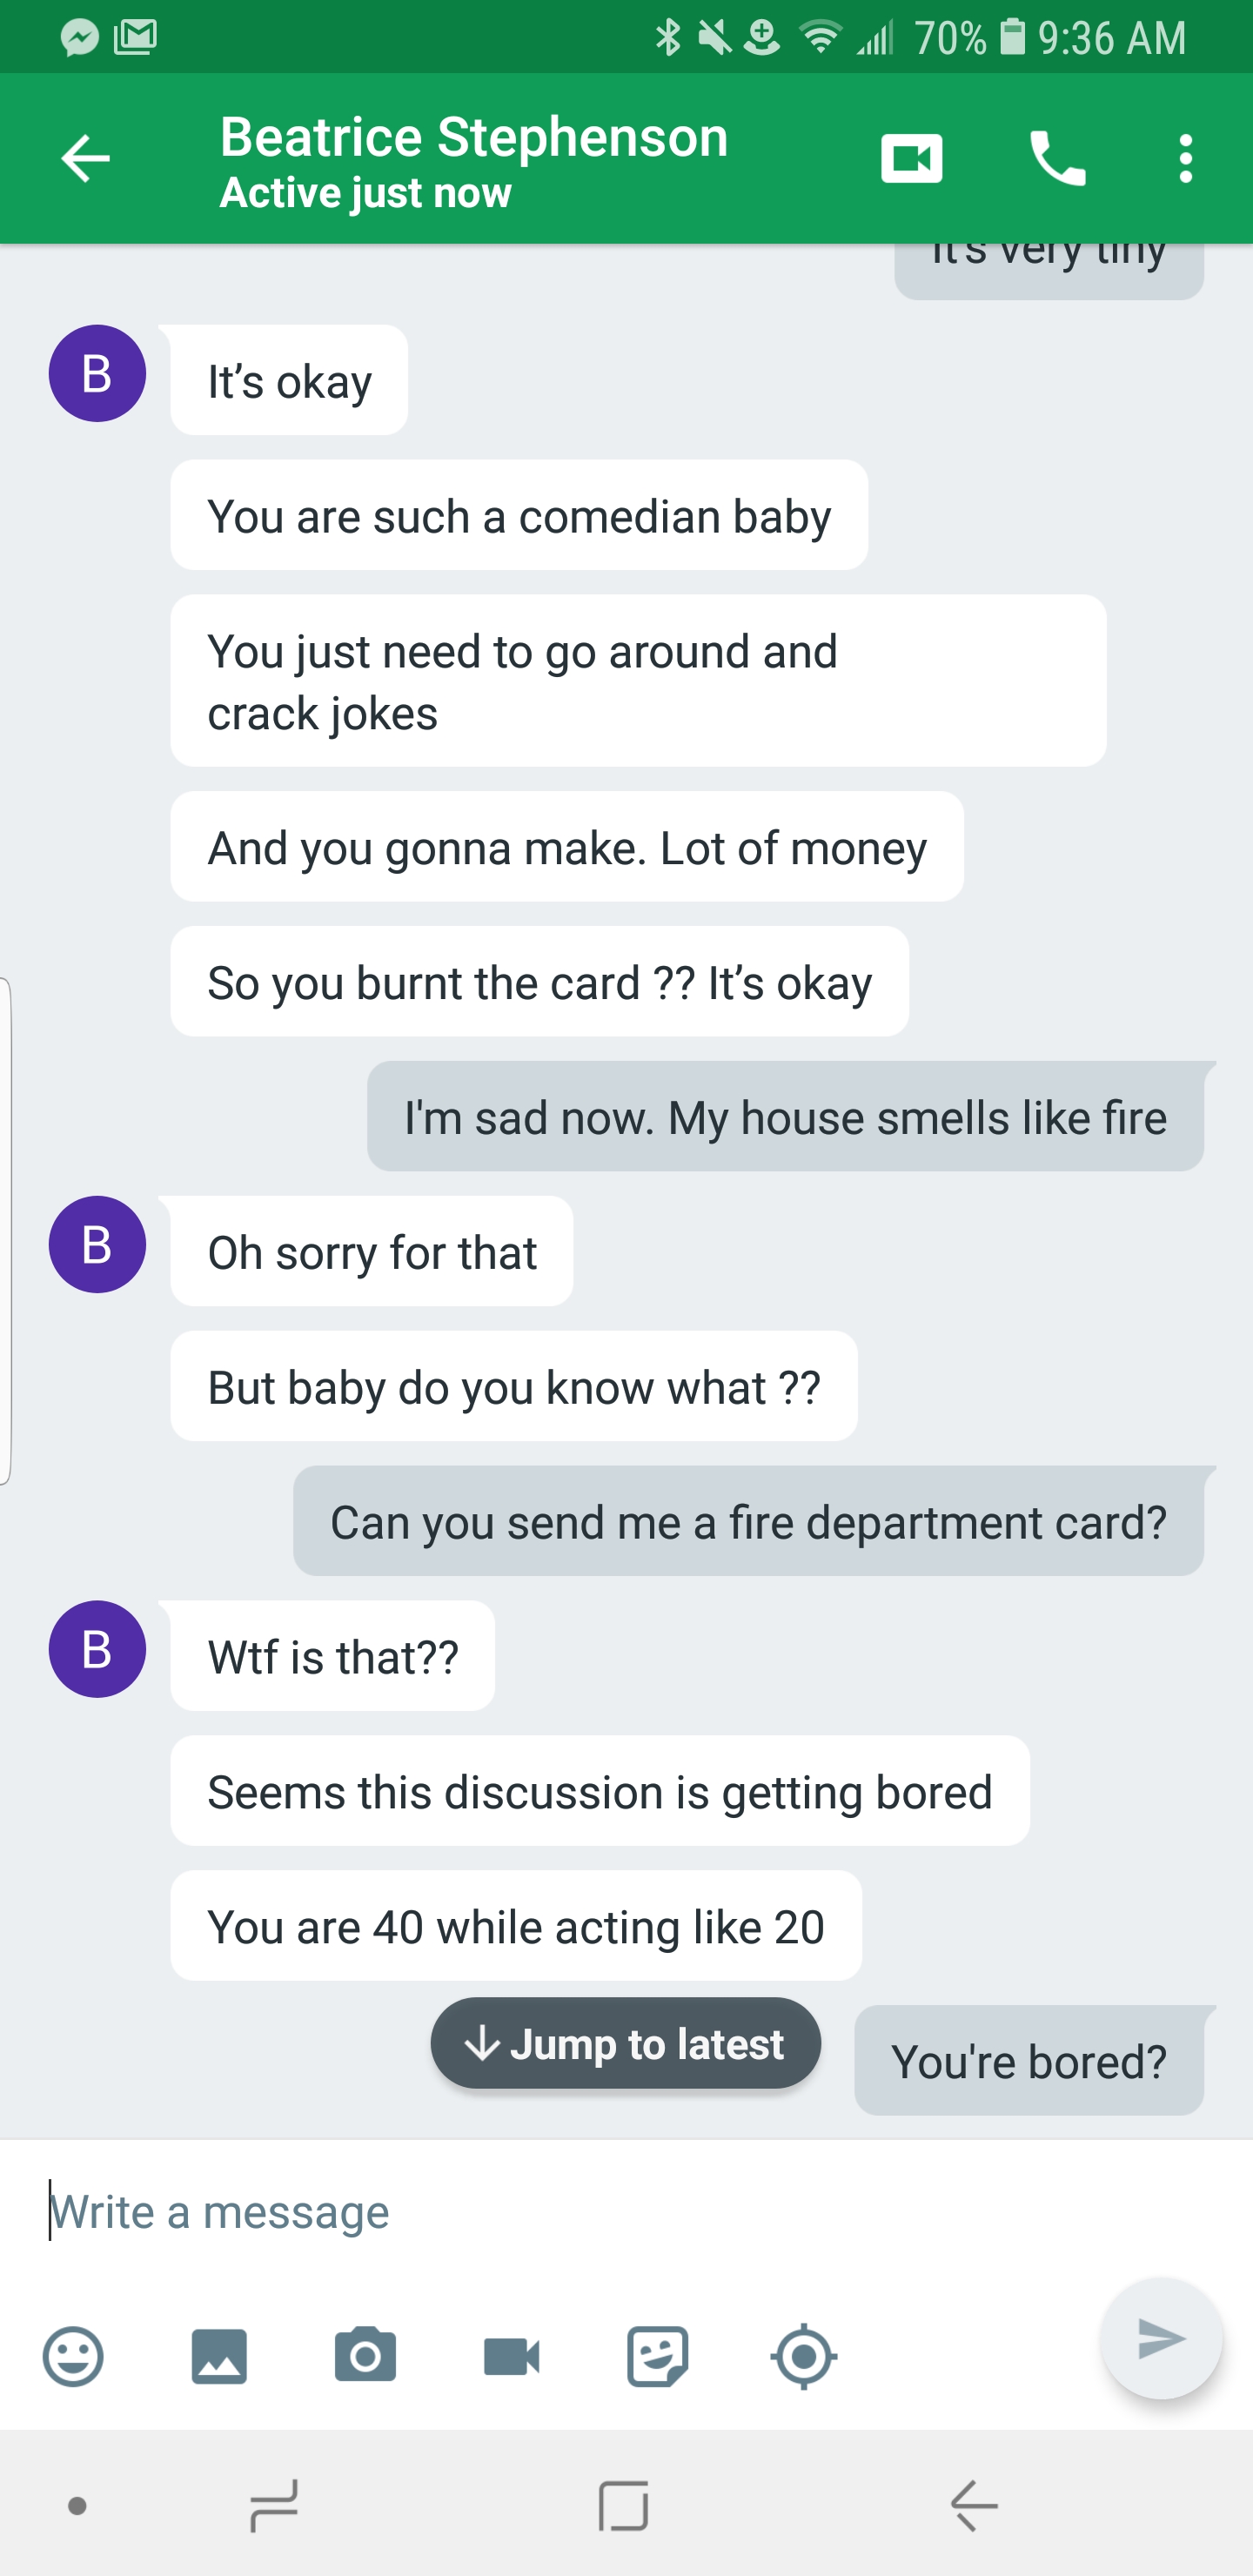 new scammer - 4 70 9 Beatrice Stephenson 9.36 Am ! Active just now It's okay You are such a comedian baby You just need to go around and crack jokes And you gonna make. Lot of money So you burnt the card ?? It's okay I'm sad now. My house smells fire Oh s